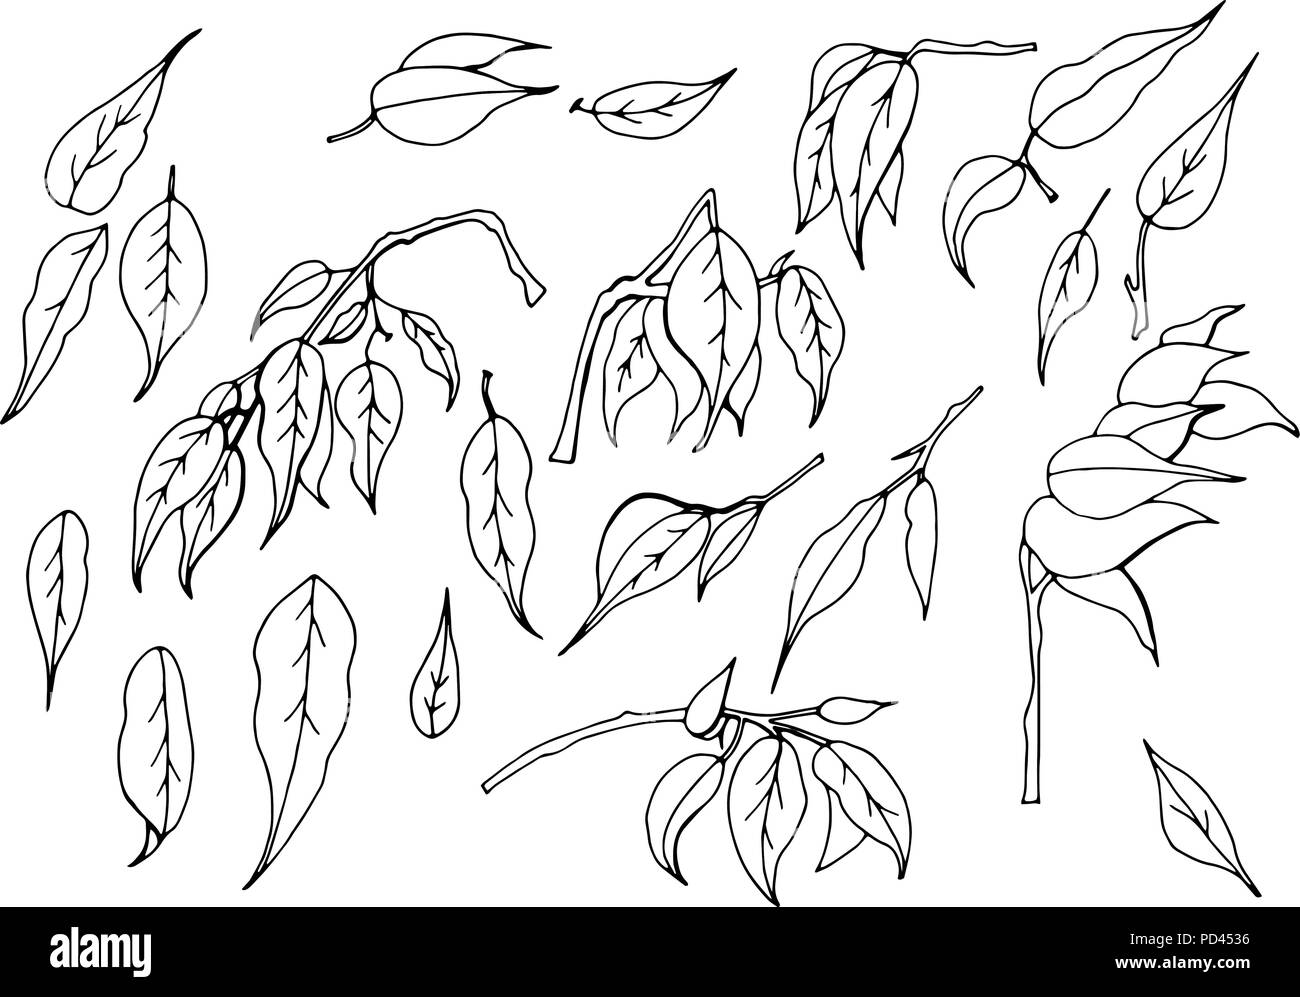 A set of black and white hand-drawn leaves of ficus benjamin on a white background Stock Vector